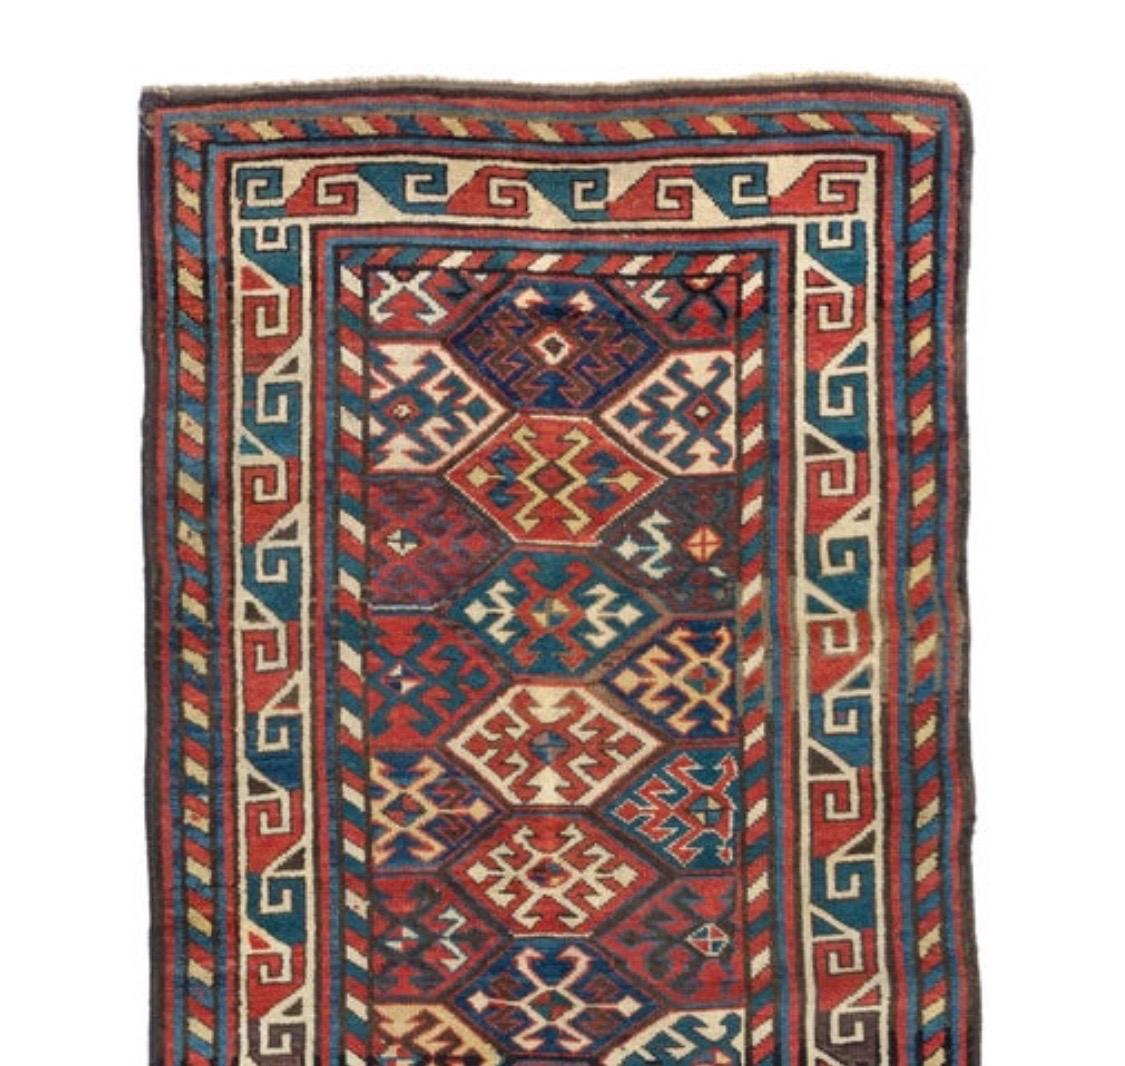 This is a hand knotted antique red ivory and navy blue tribal Caucasian Kazak rug, circa 1880-1900 measuring: 3 x 6 ft.

 